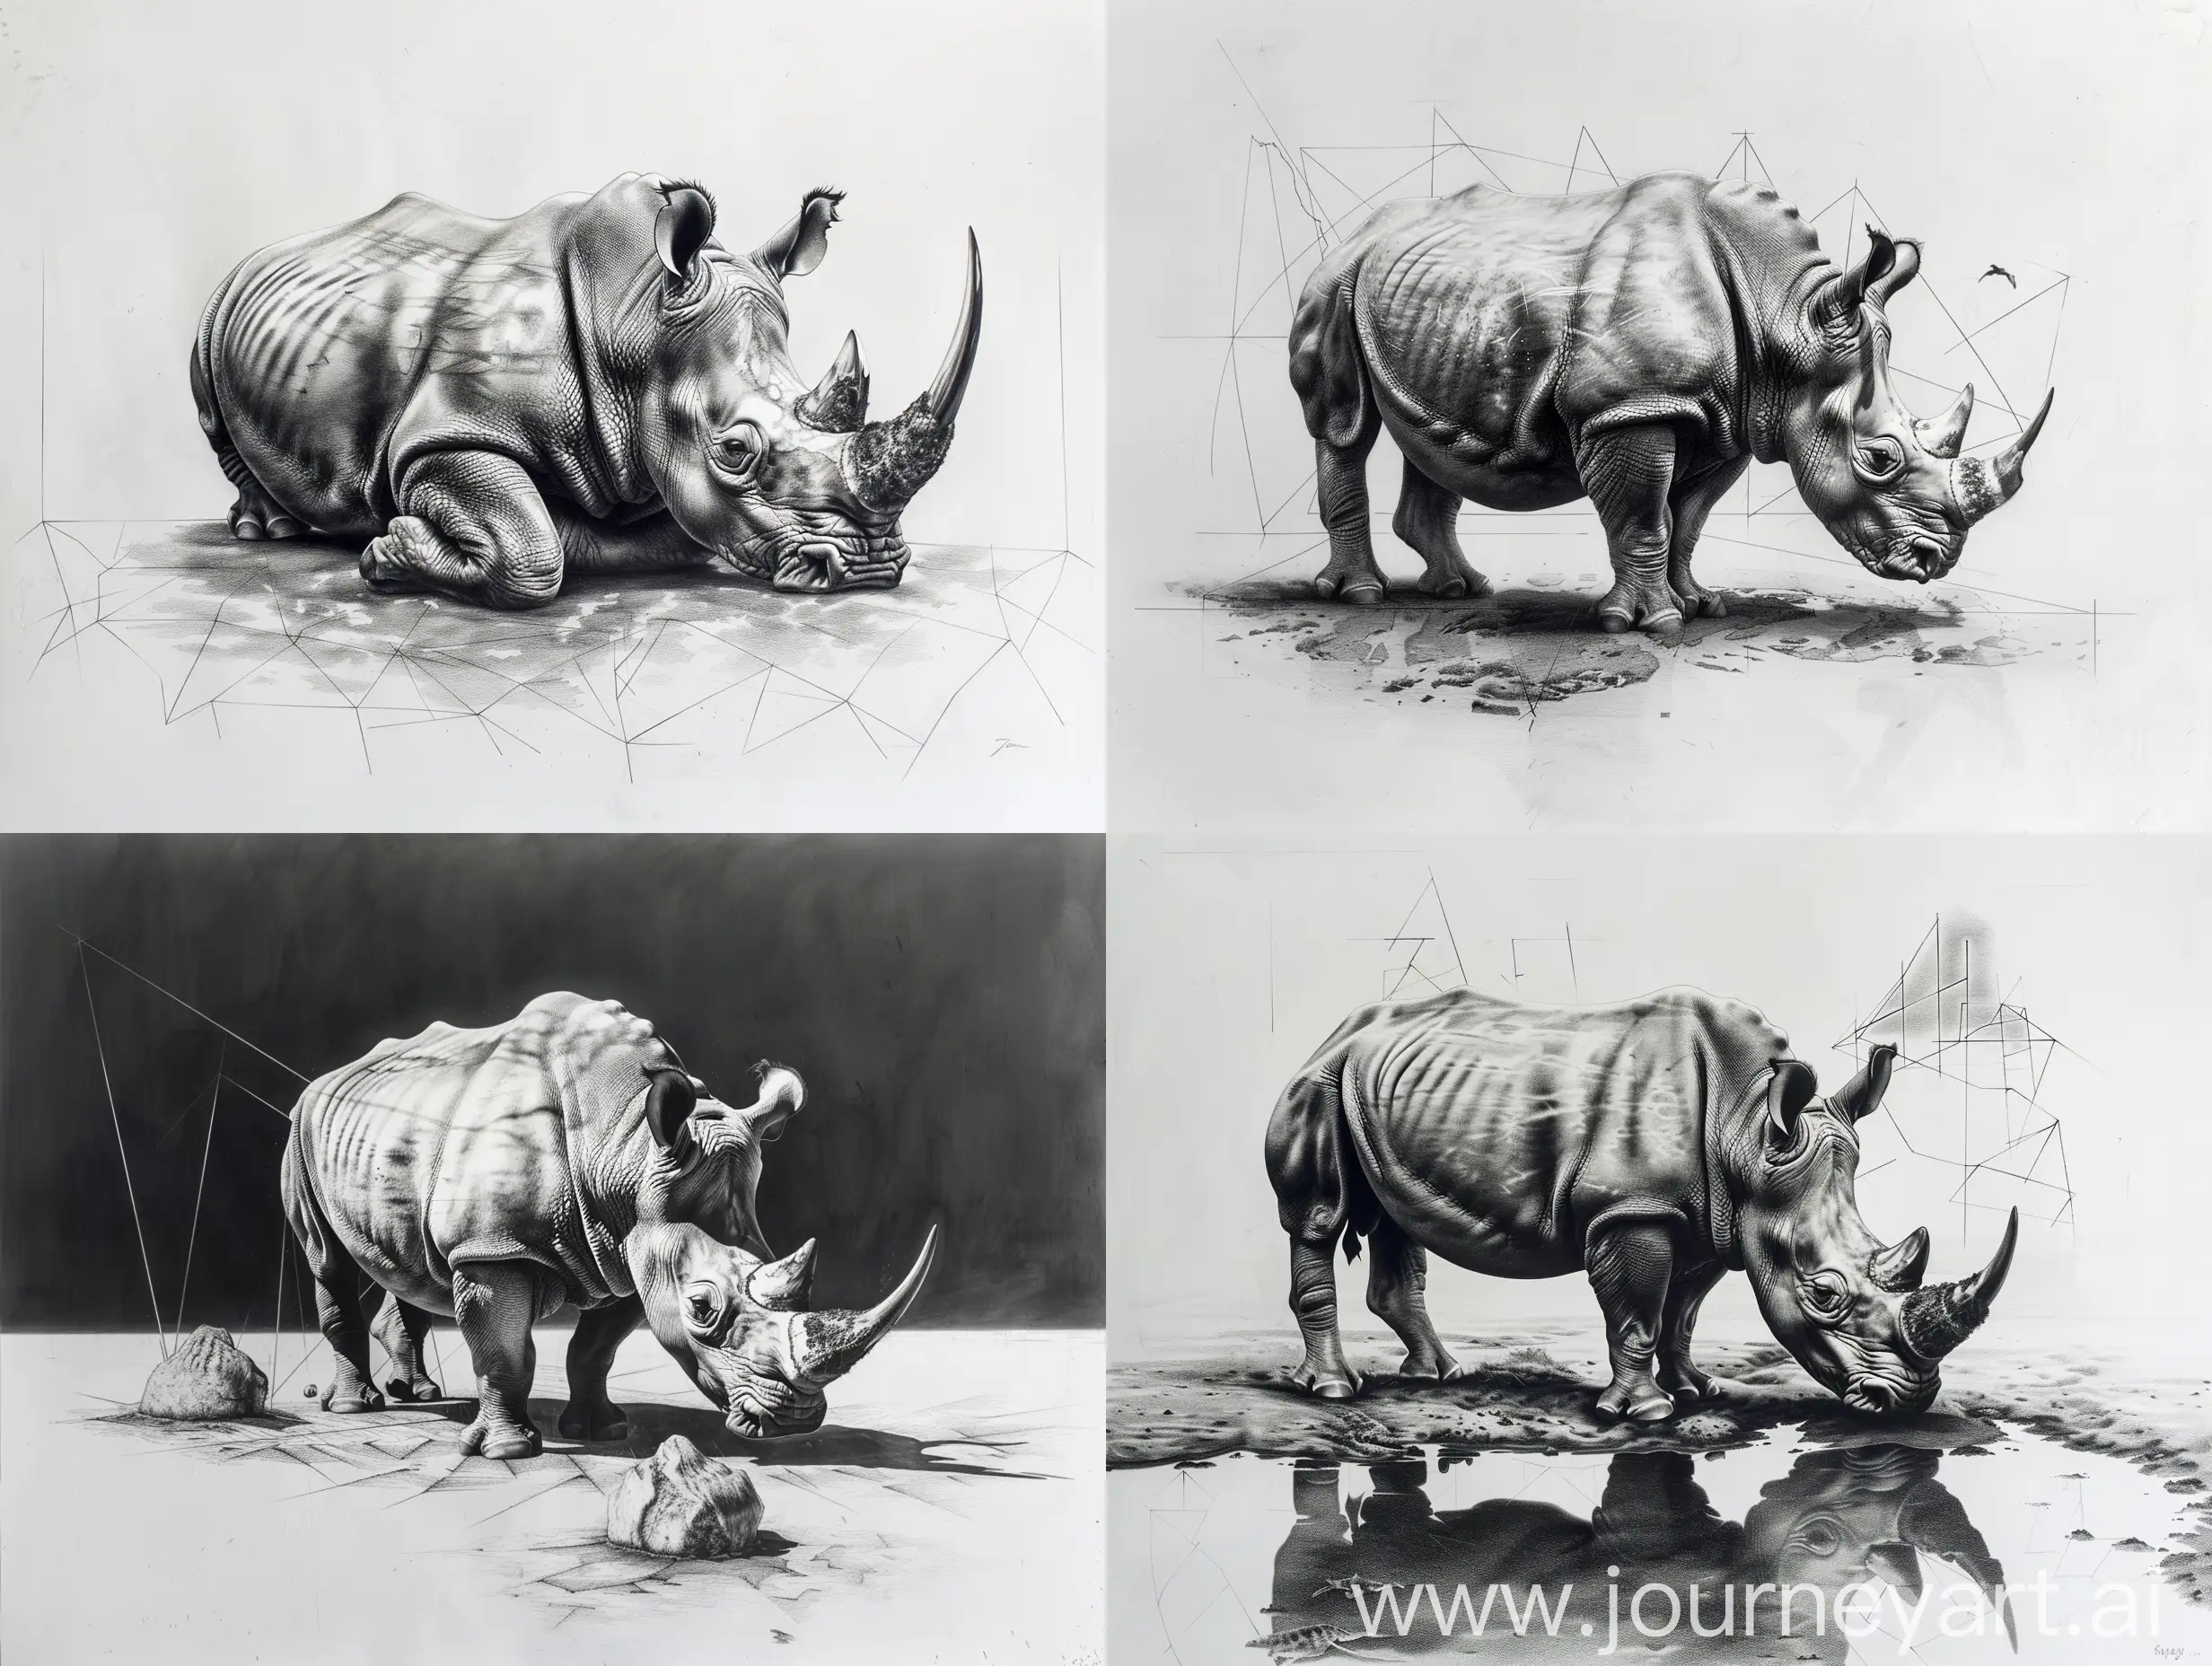 Solitary-Rhino-Sketch-Detailed-Hyper-Realistic-Pencil-Art-on-Canvas